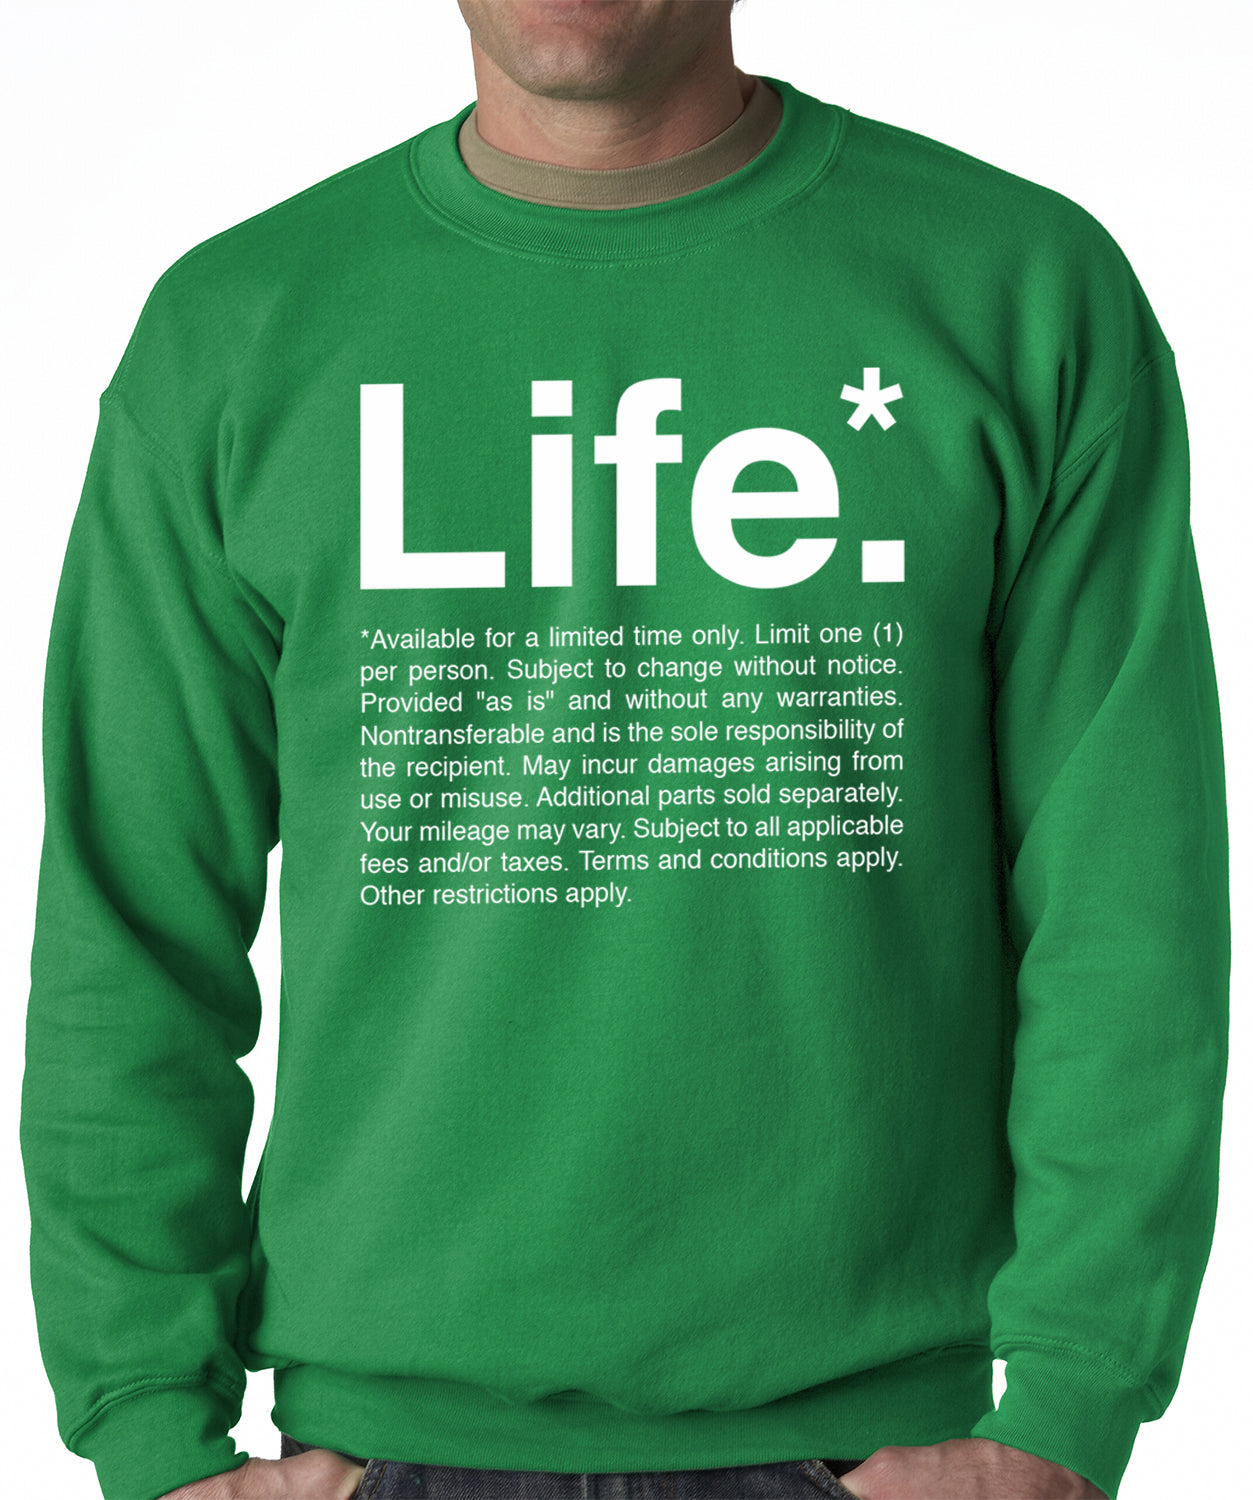 The Terms of Life Adult Crewneck